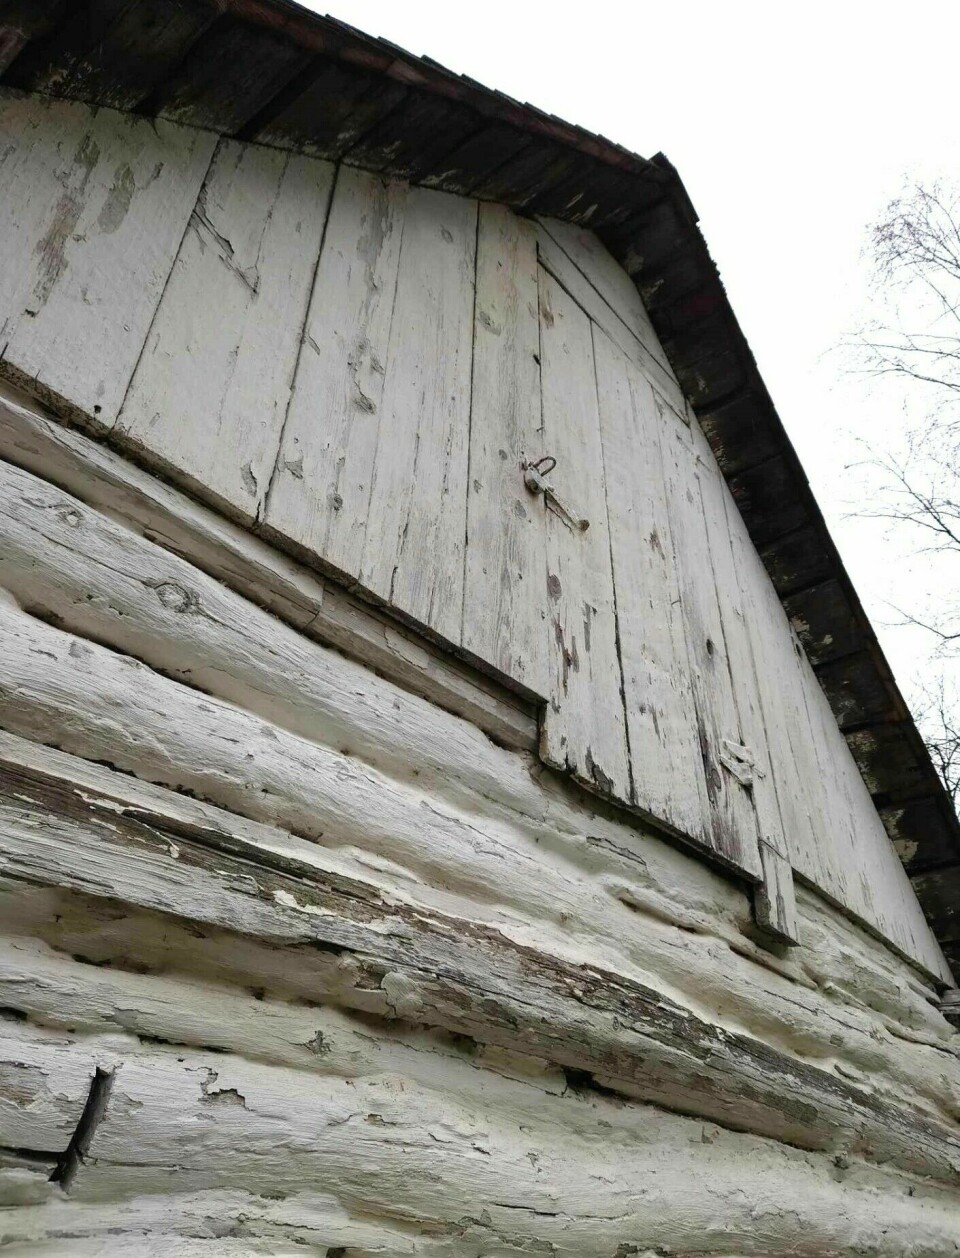 The Gunderson House from Minnesota is another pioneer’s house. The children in the house are said to have climbed up this attic hatch when it was bedtime.